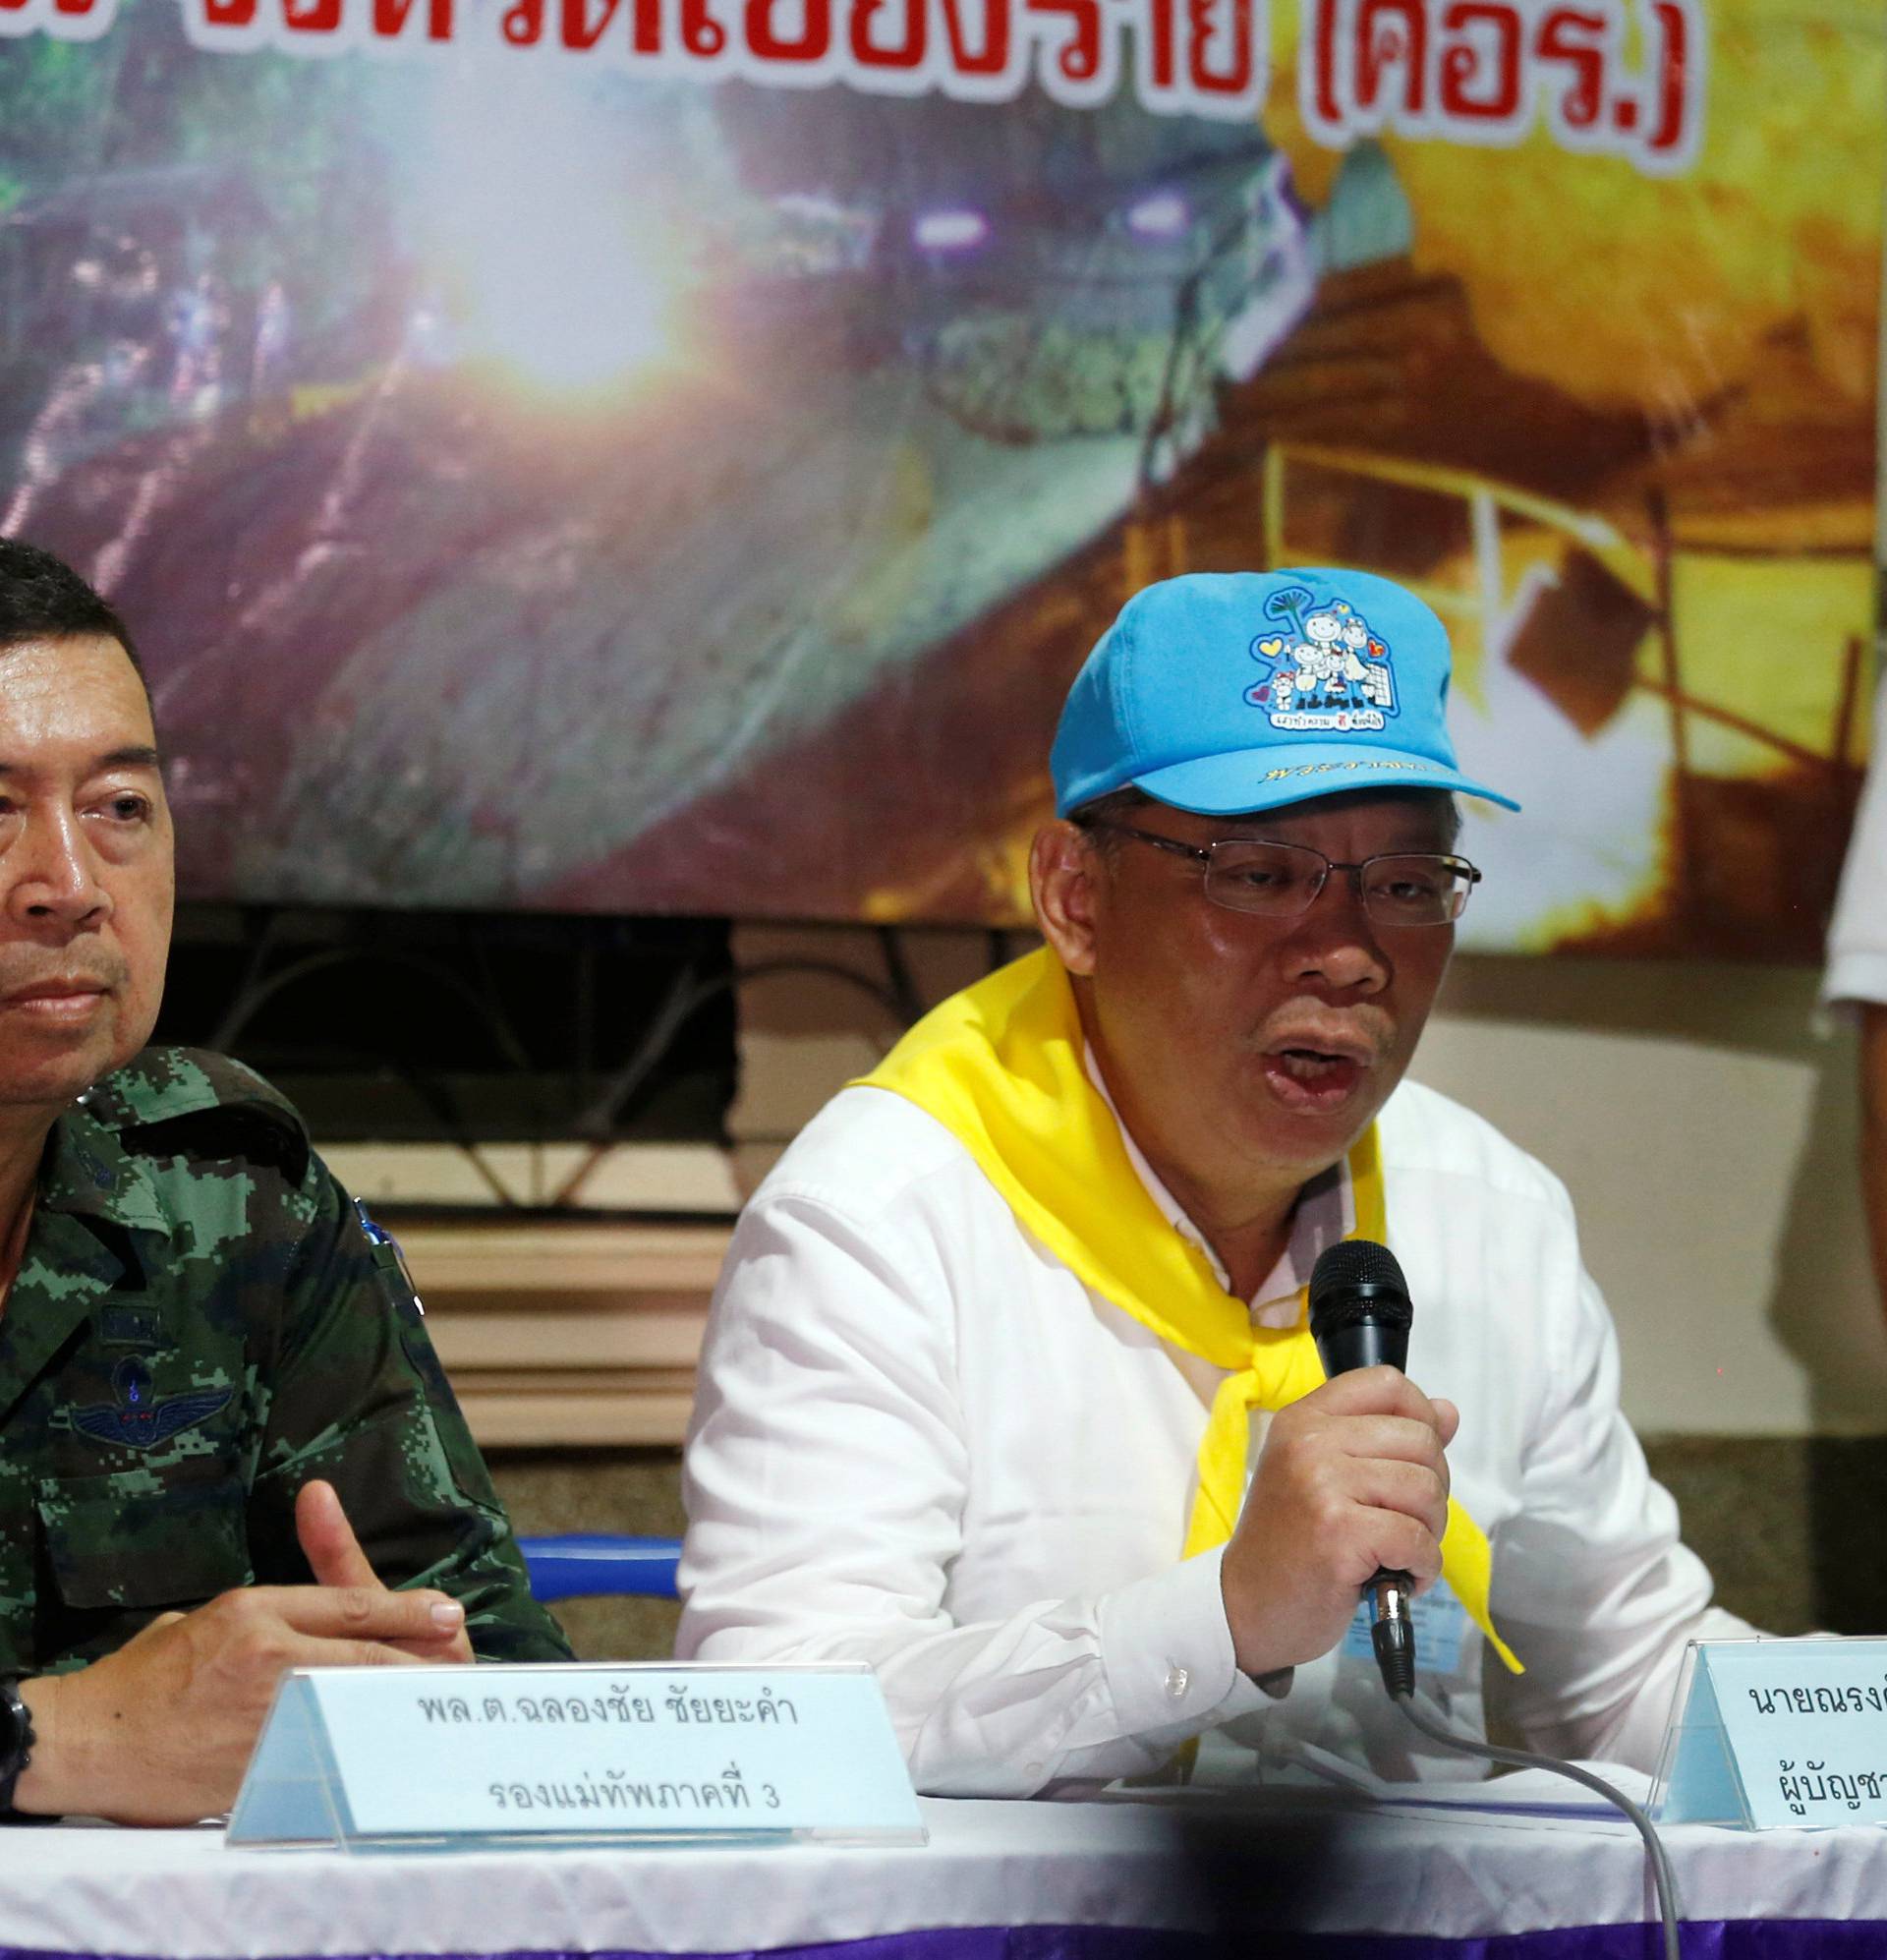 Chiang Rai province acting governor Narongsak Osatanakorn talks to journalist during a news conference near Tham Luang cave complex, in the northern province of Chiang Rai